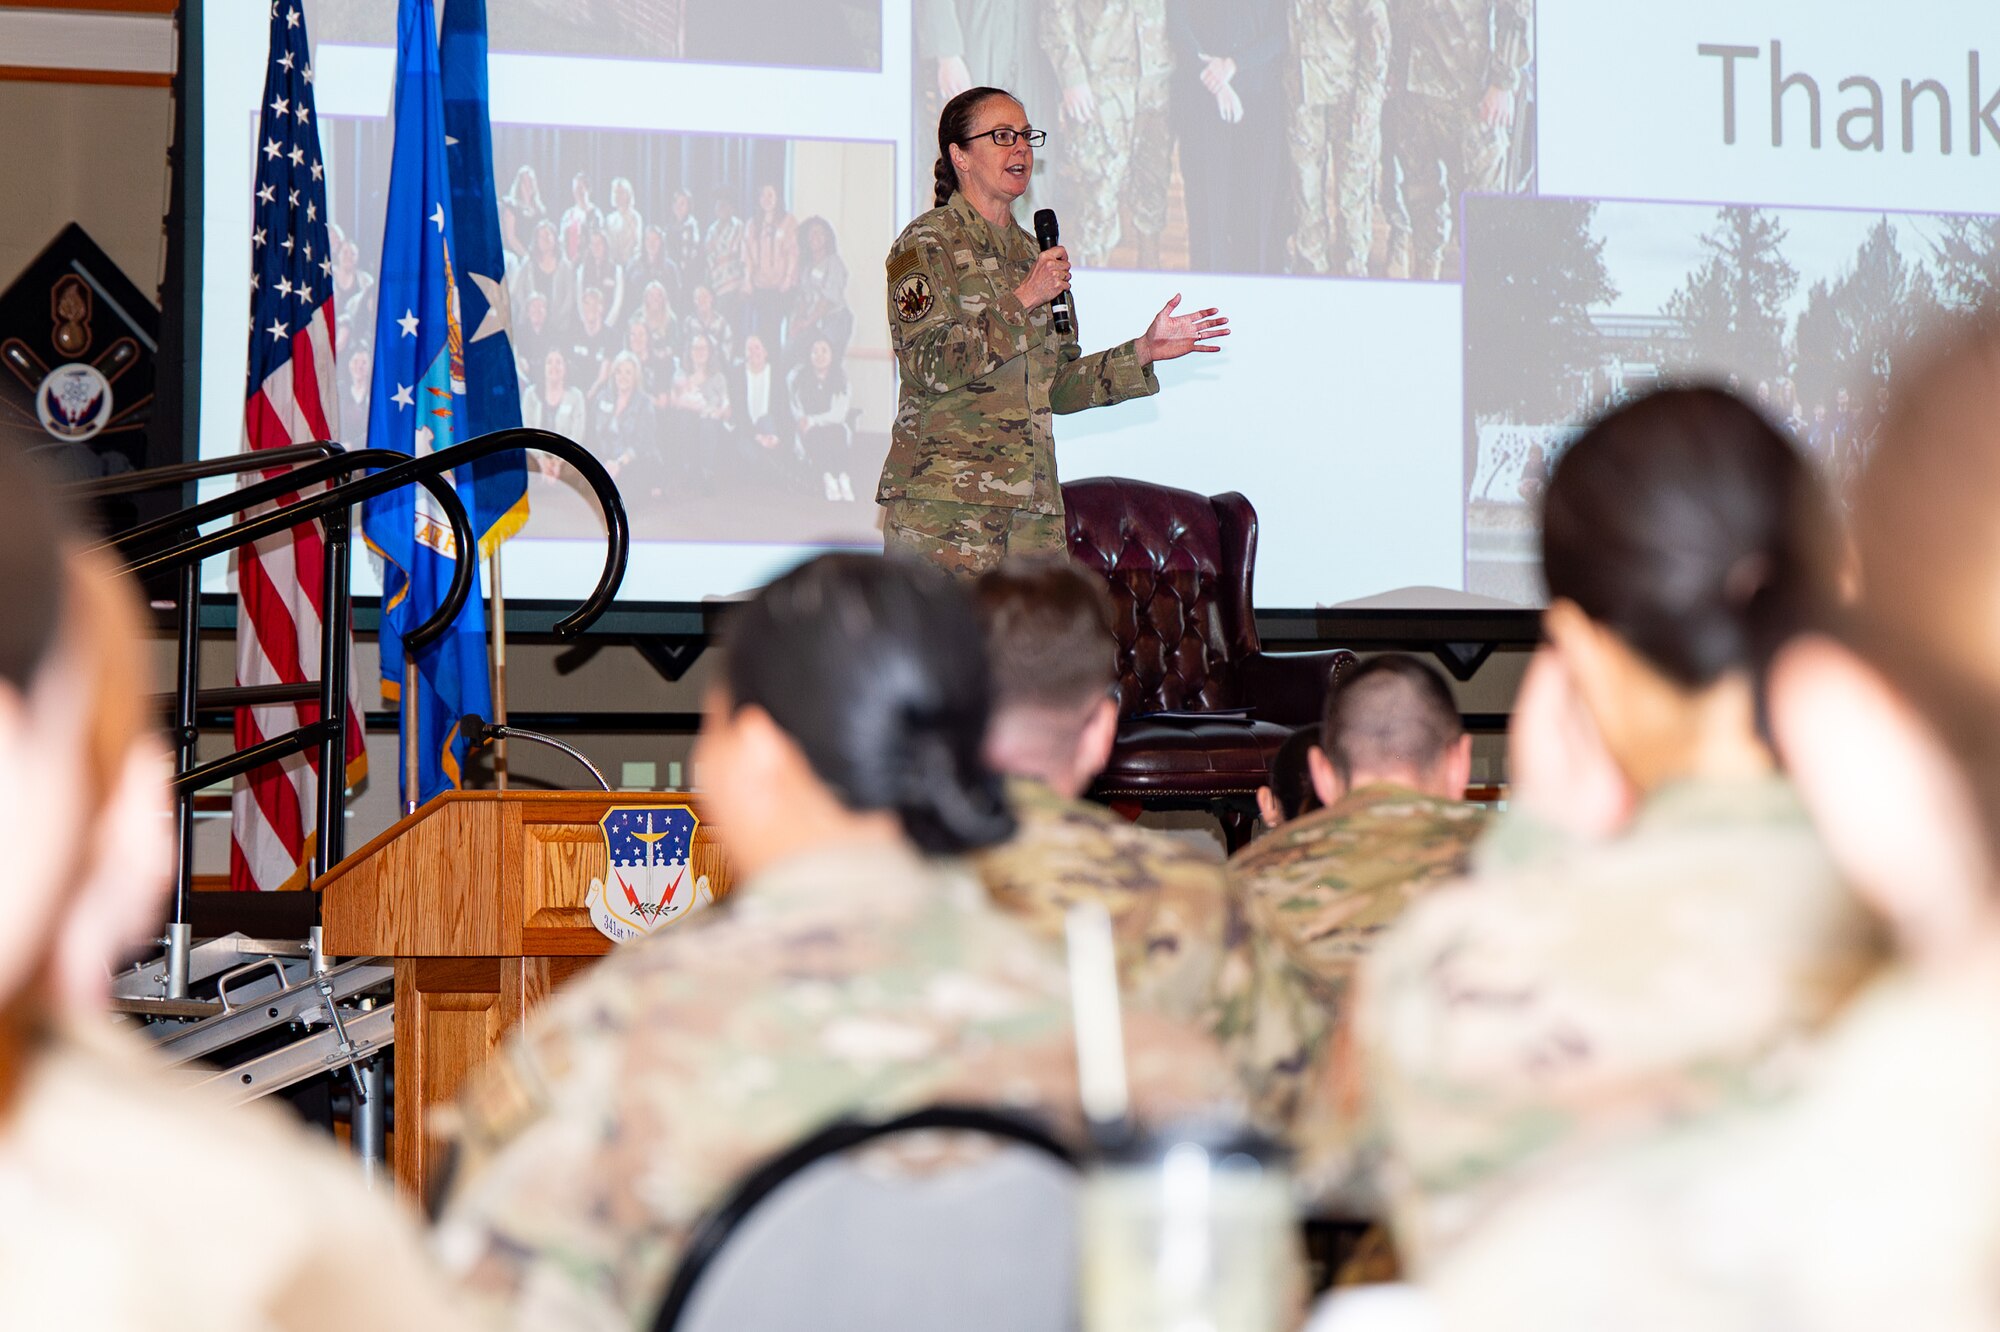 20th Air Force commander visits Malmstrom for Women’s History Month